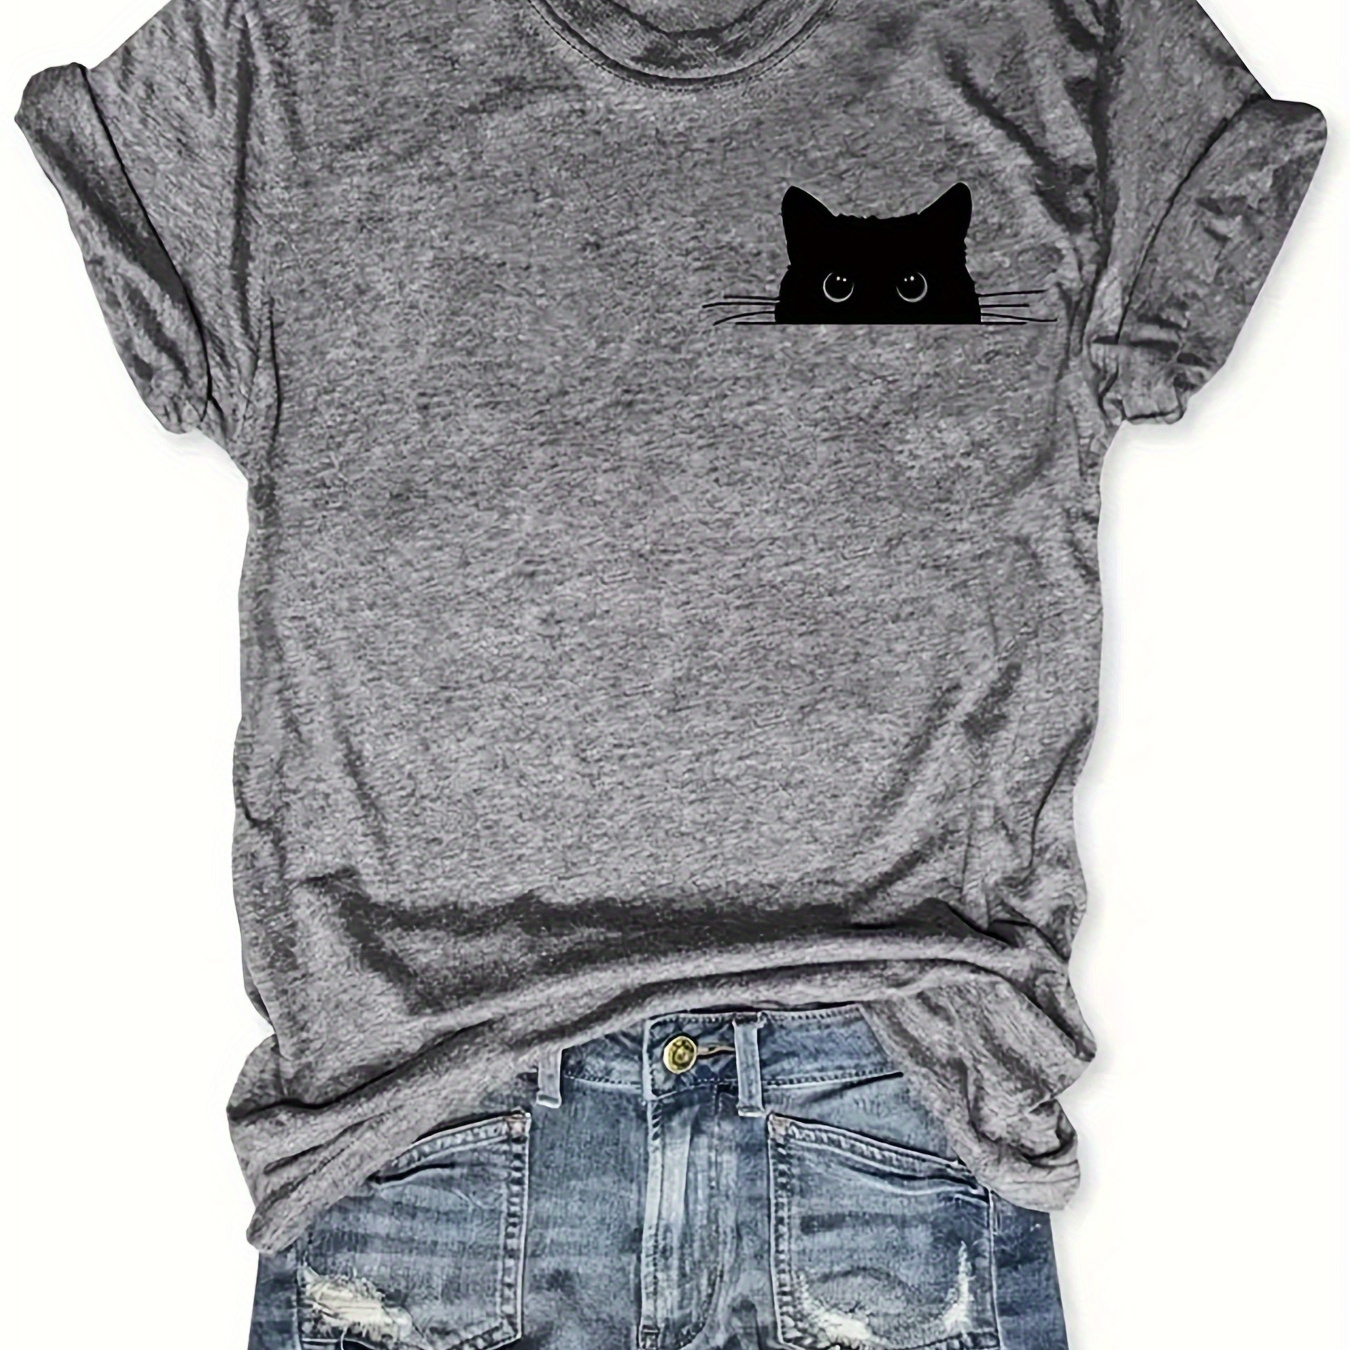 

Cat Print Crew Neck T-shirt, Casual Short Sleeve Top For Spring & Summer, Women's Clothing